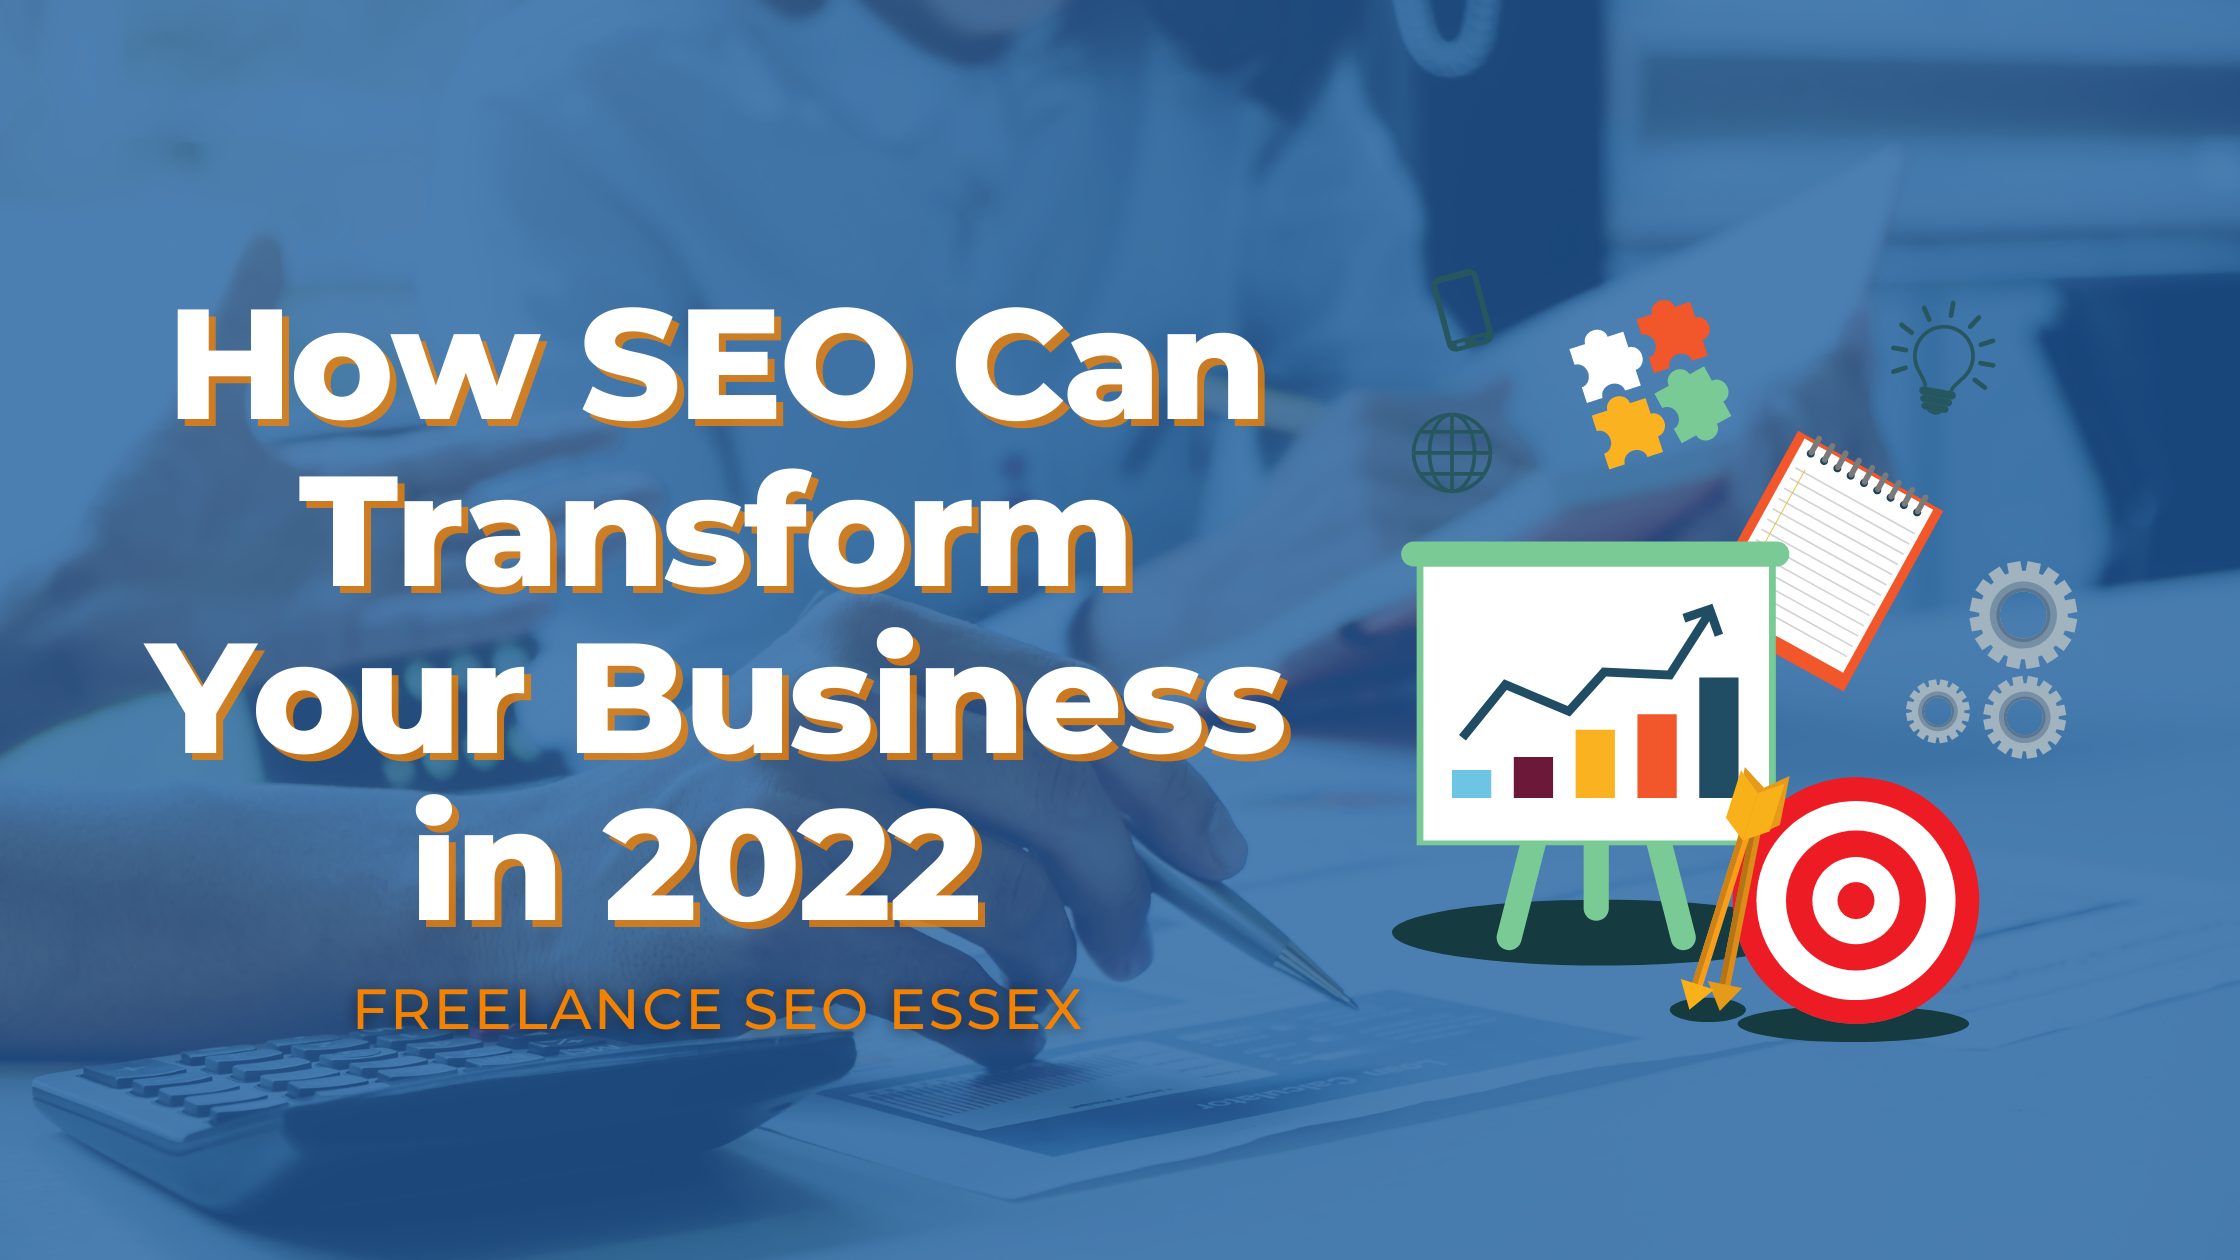 How SEO Can Transform Your Business in 2022